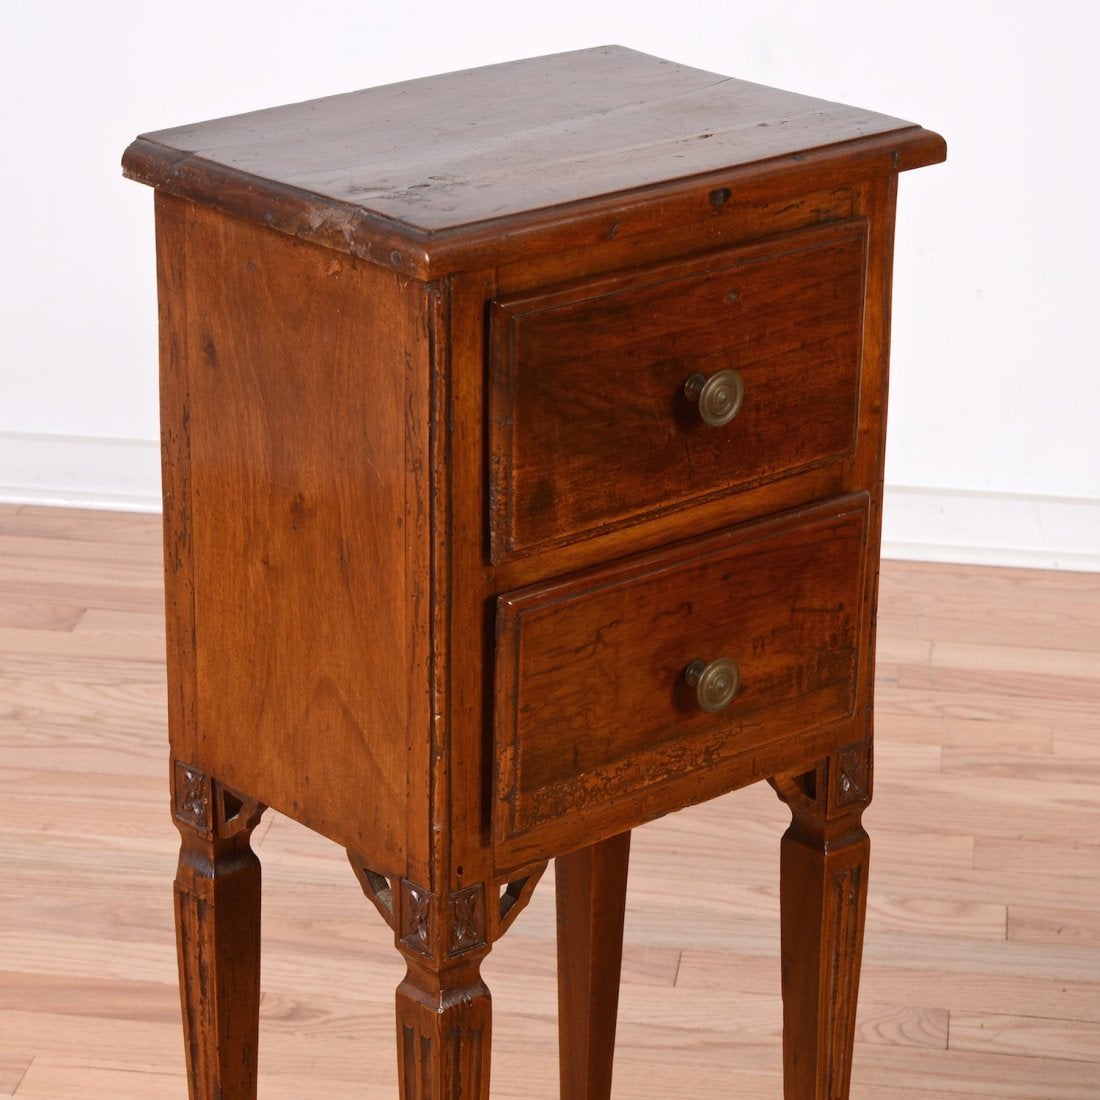 Italian Neoclassical Carved Walnut Side Table with Two Drawers , 18th Century